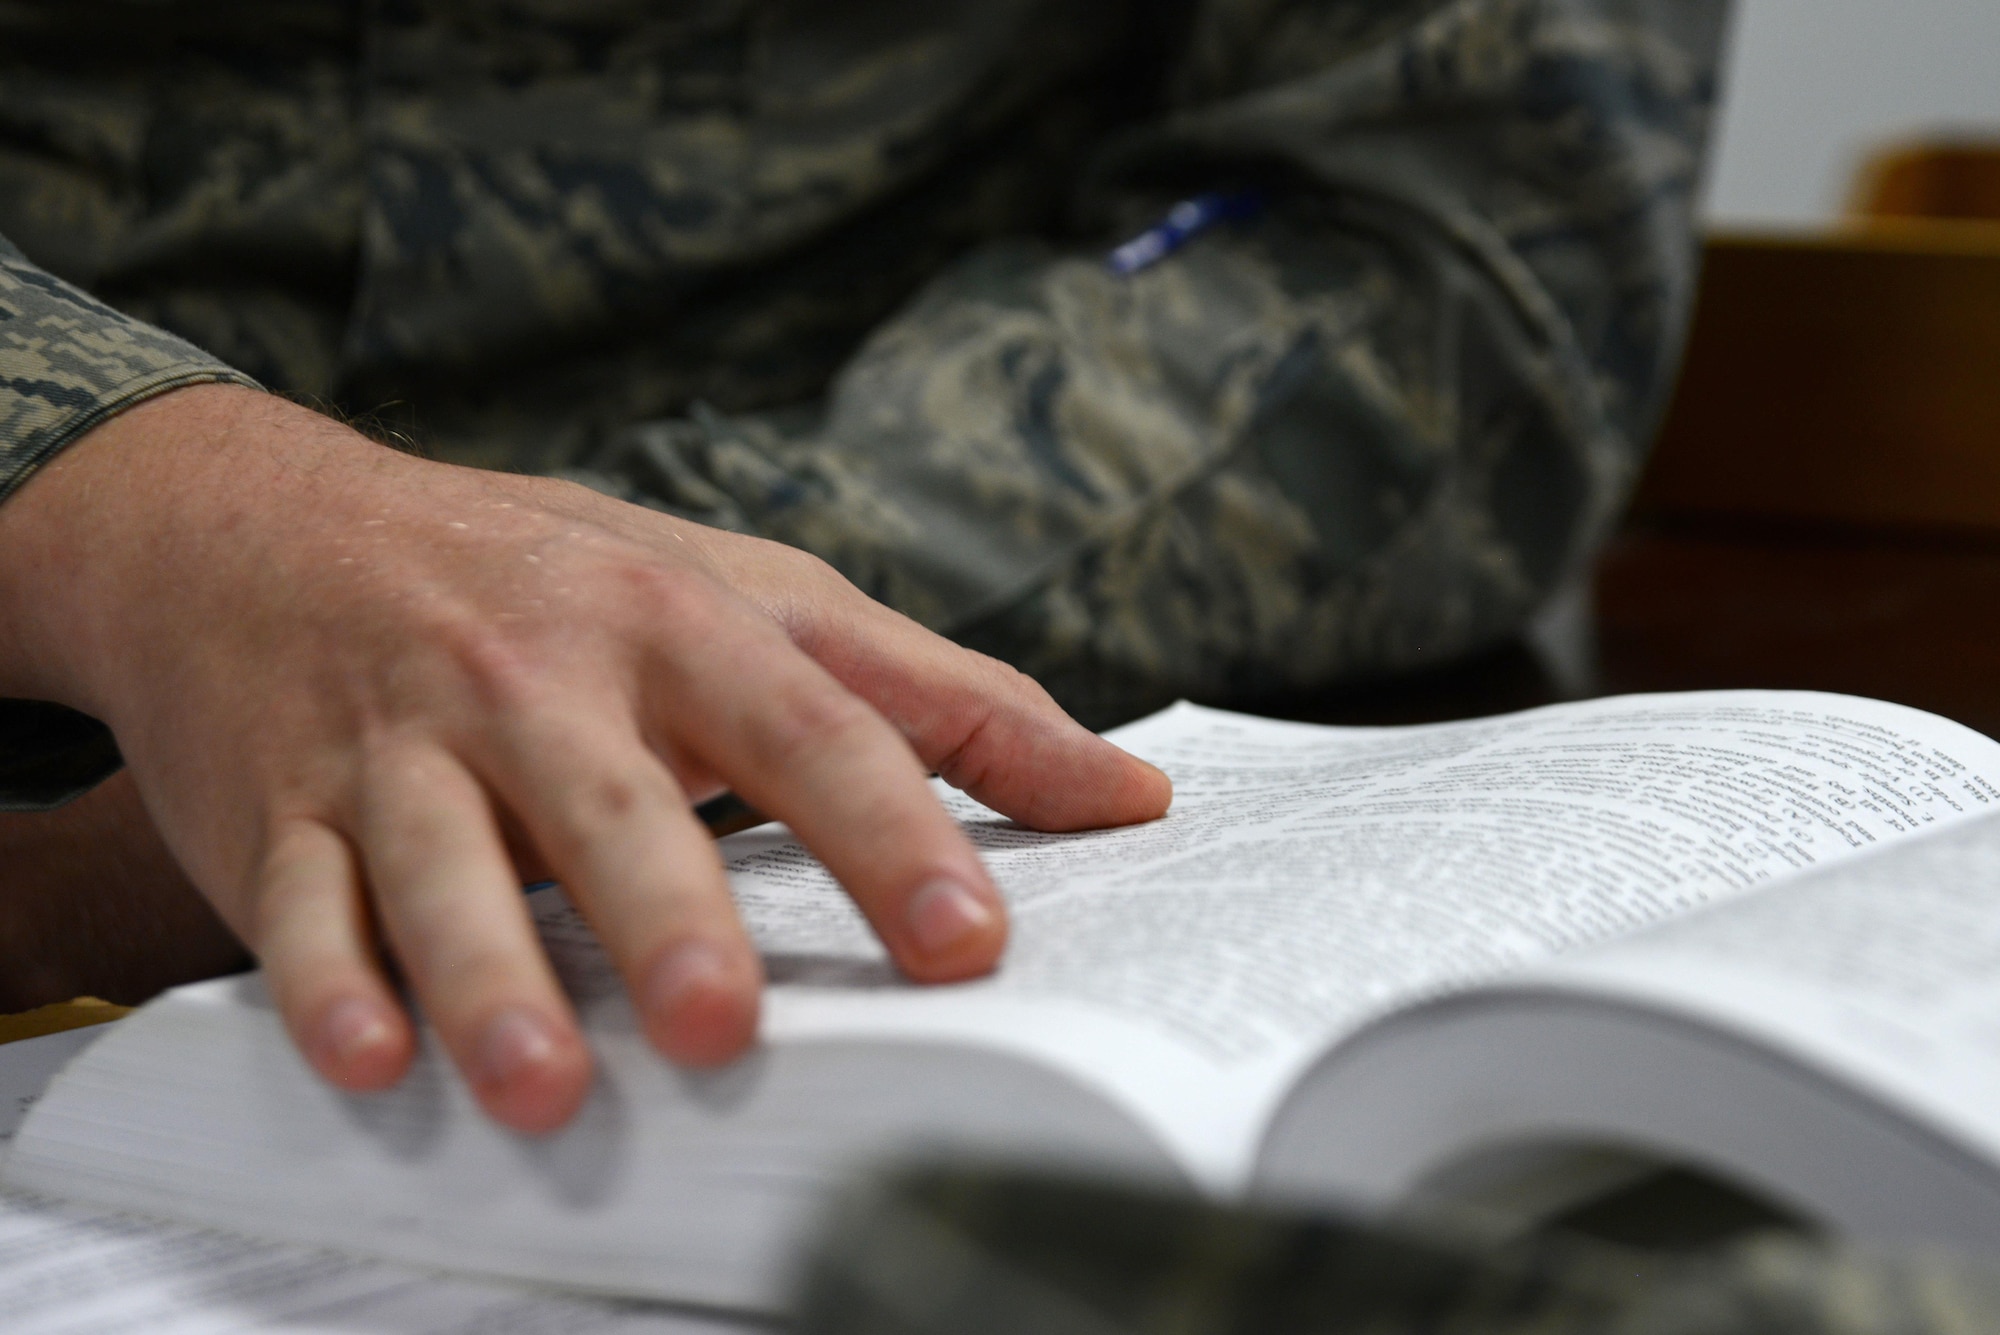 U.S. Air Force Senior Airman Quest Largent, 20th Fighter Wing Judge Advocate (JA) military justice paralegal, reads from a courts-martial manual at Shaw Air Force Base, S.C., May 9, 2017. The manual details punitive articles individuals can be charged under and provides JA Airmen information on how to write the charges. (U.S. Air Force photo by Airman 1st Class Kathryn R.C. Reaves)